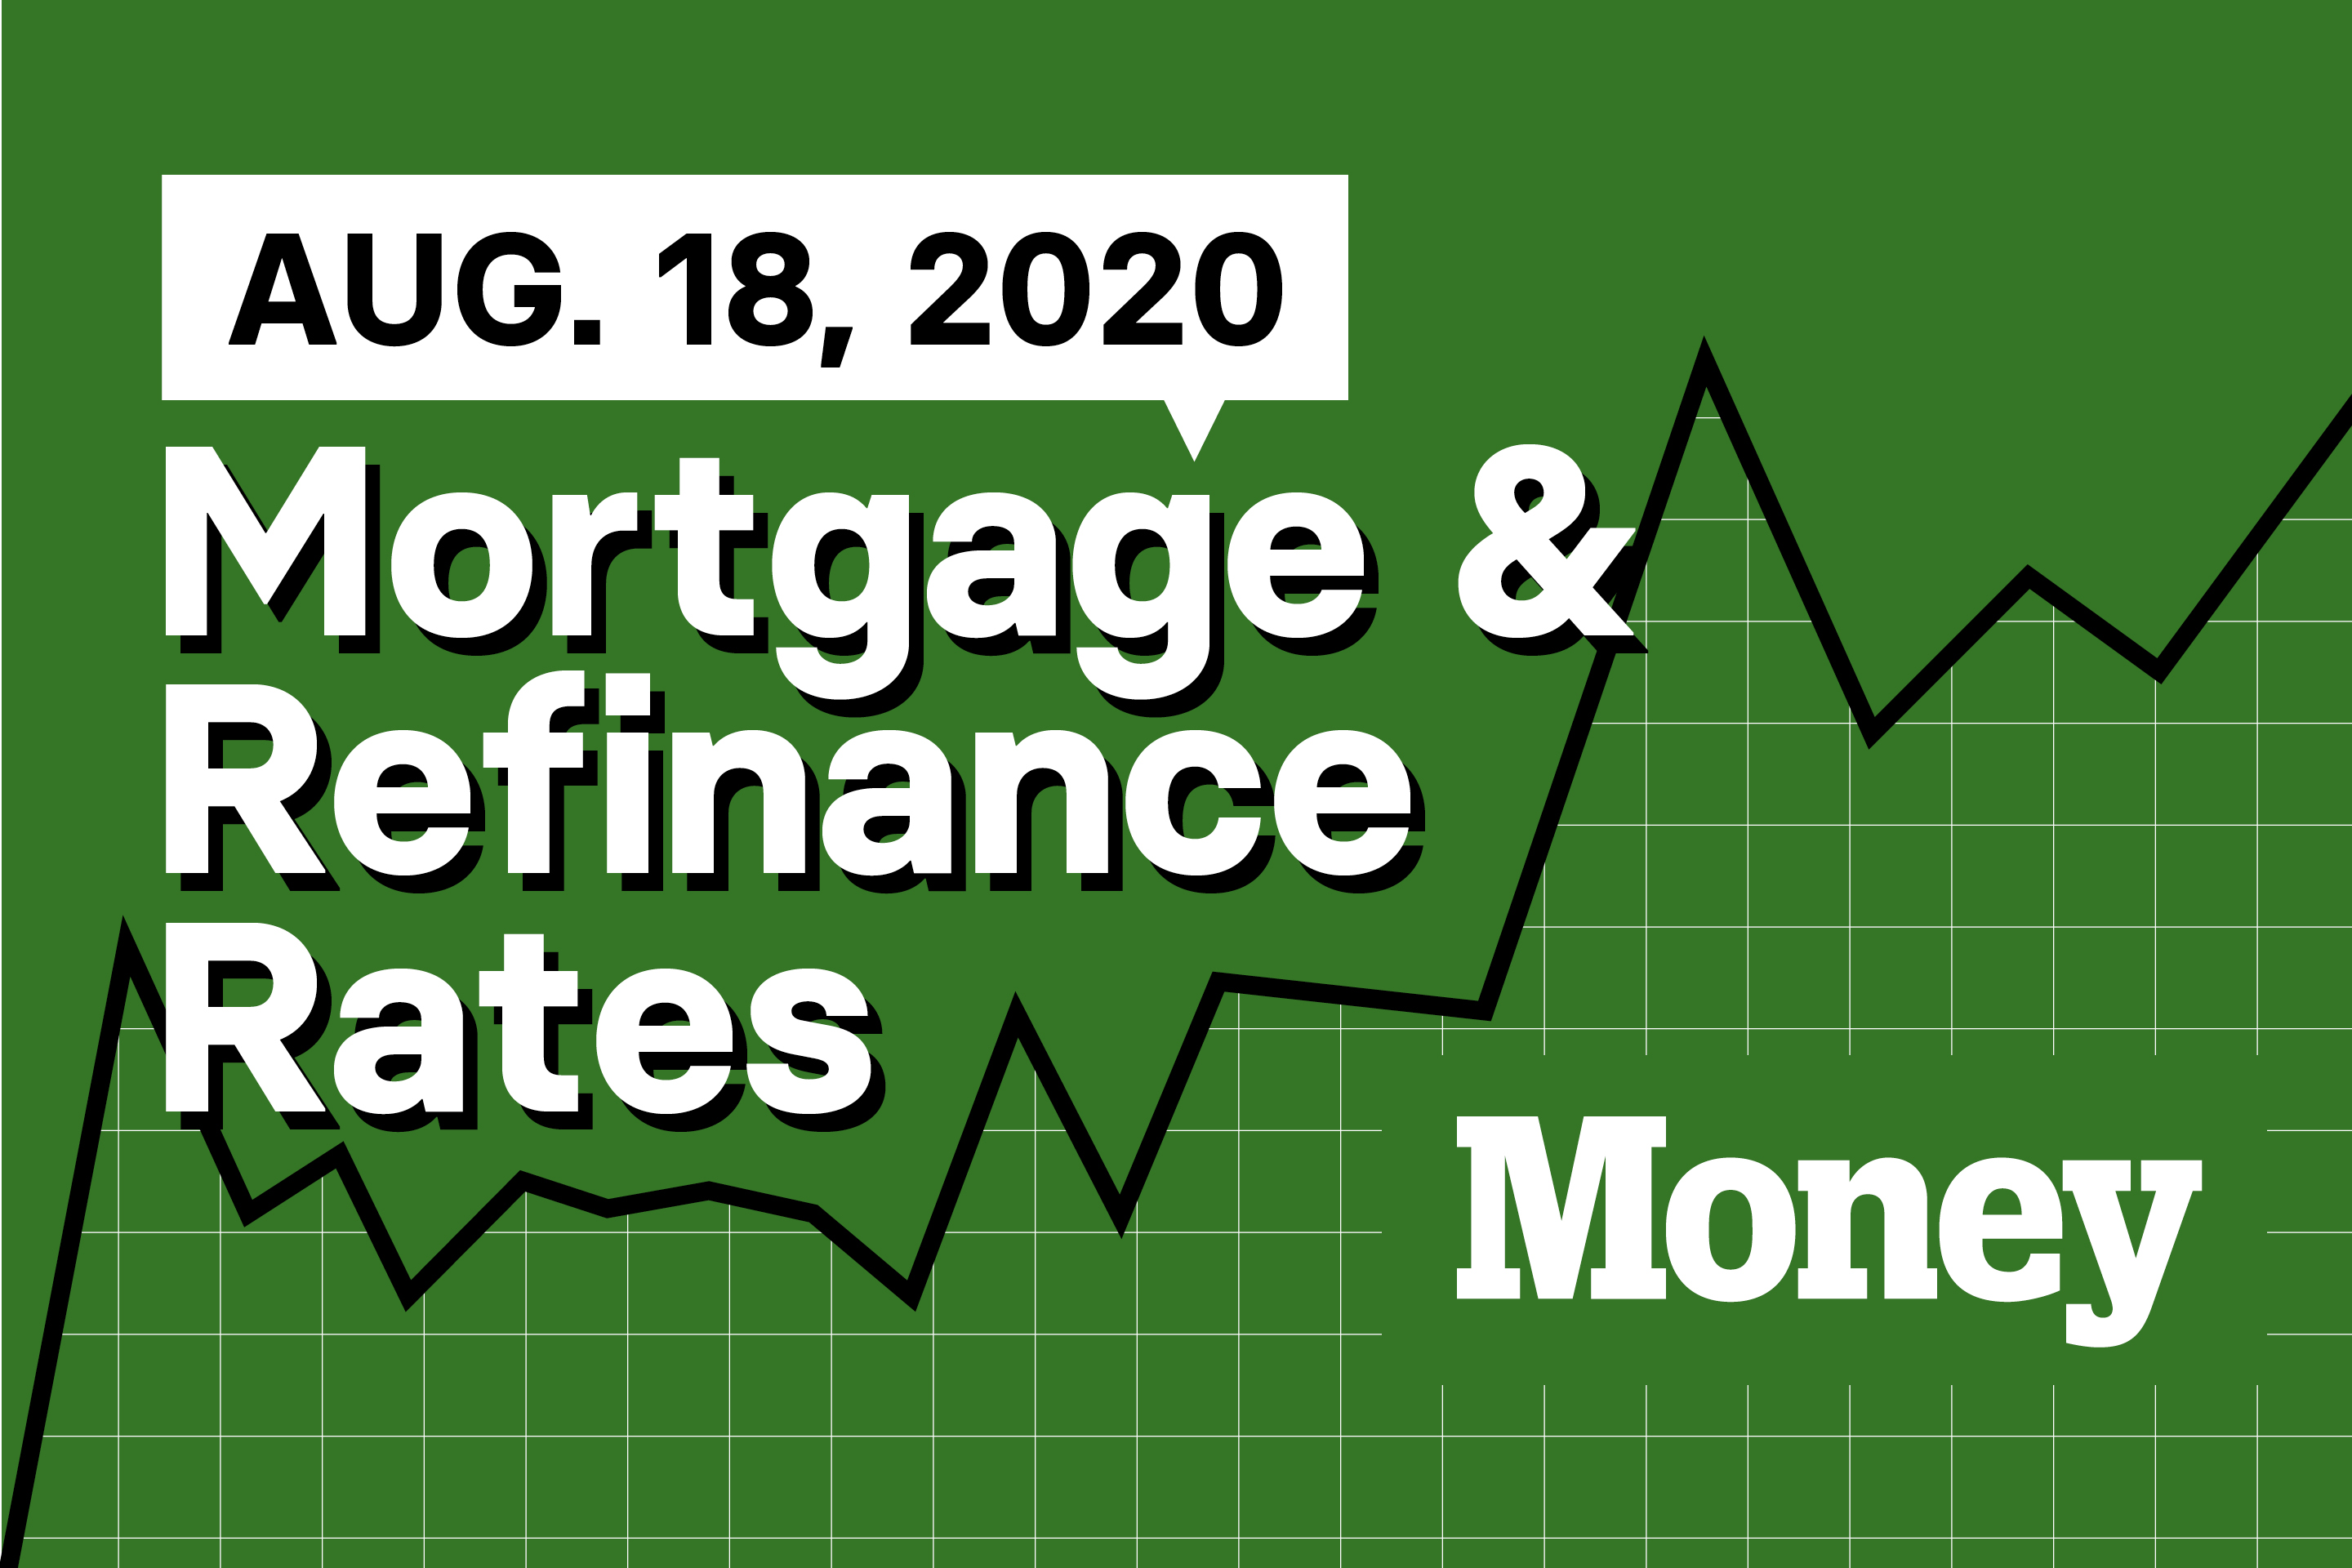 Here Are Today's Best Mortgage & Refinance Rates for August 18, 2020